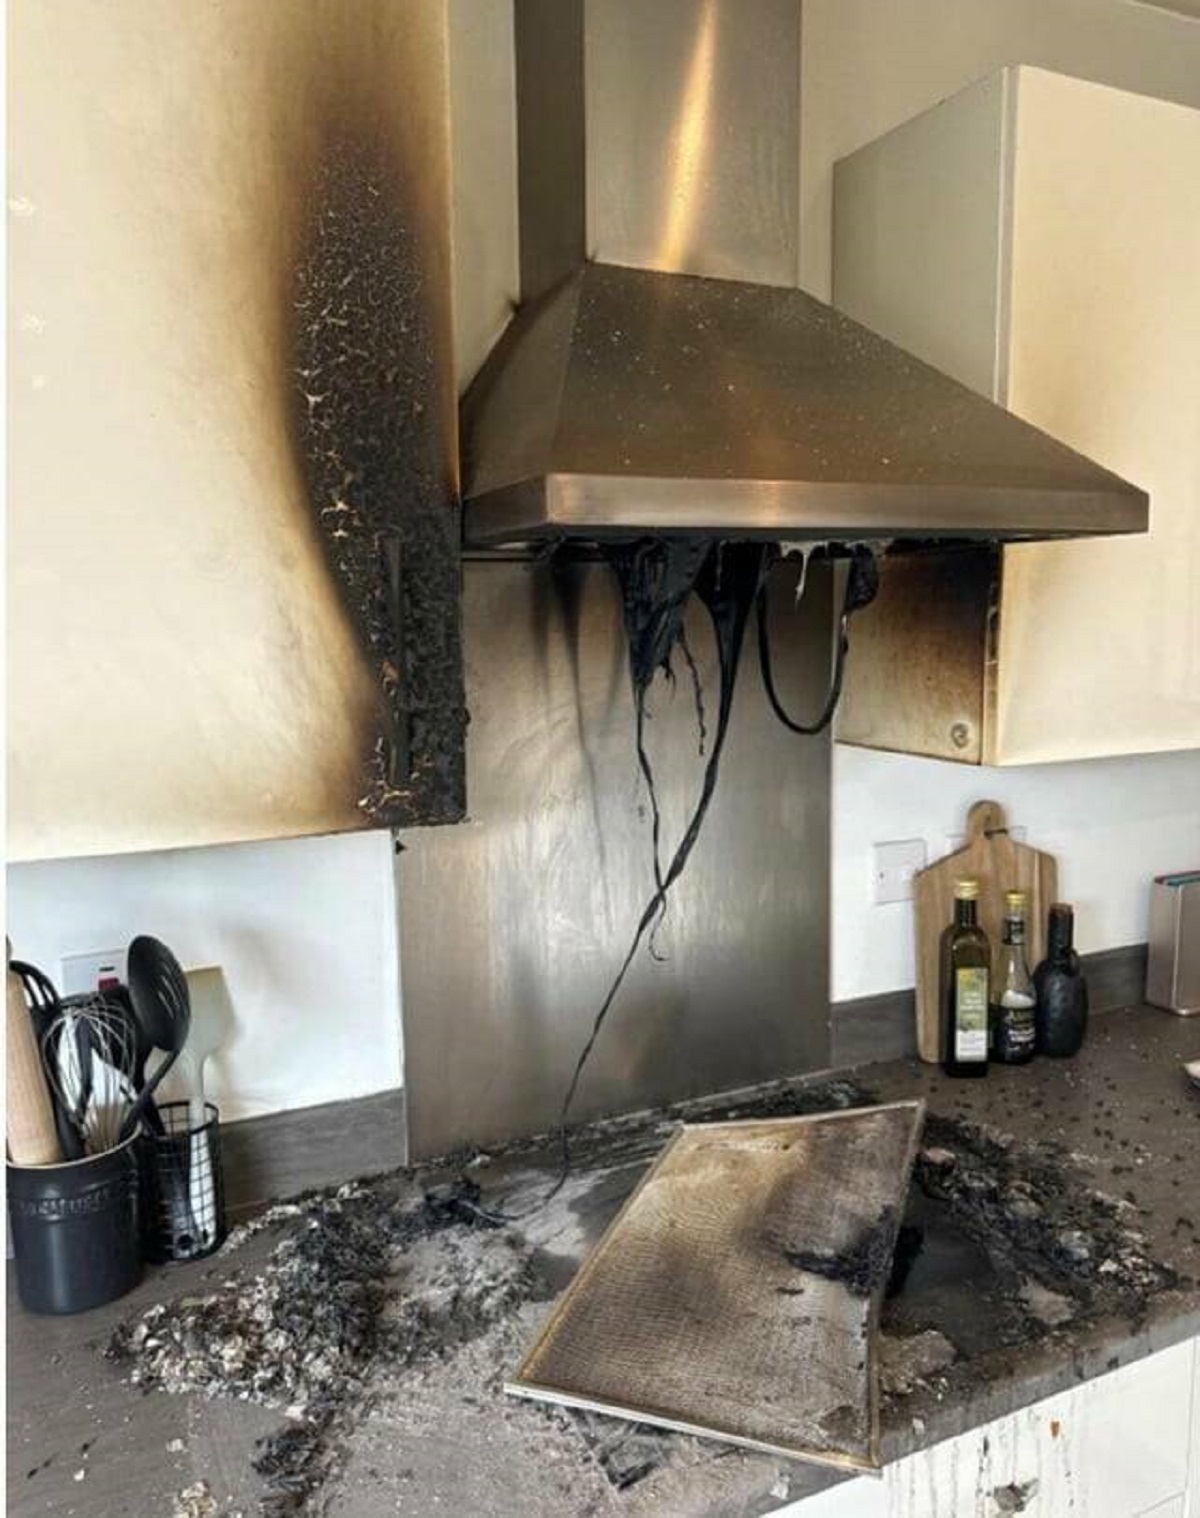 "Came home from work today to find out our cooker hood had set alight due to electrical fault, covering the house in soot and smoke. We’ve had to move into temporary housing."